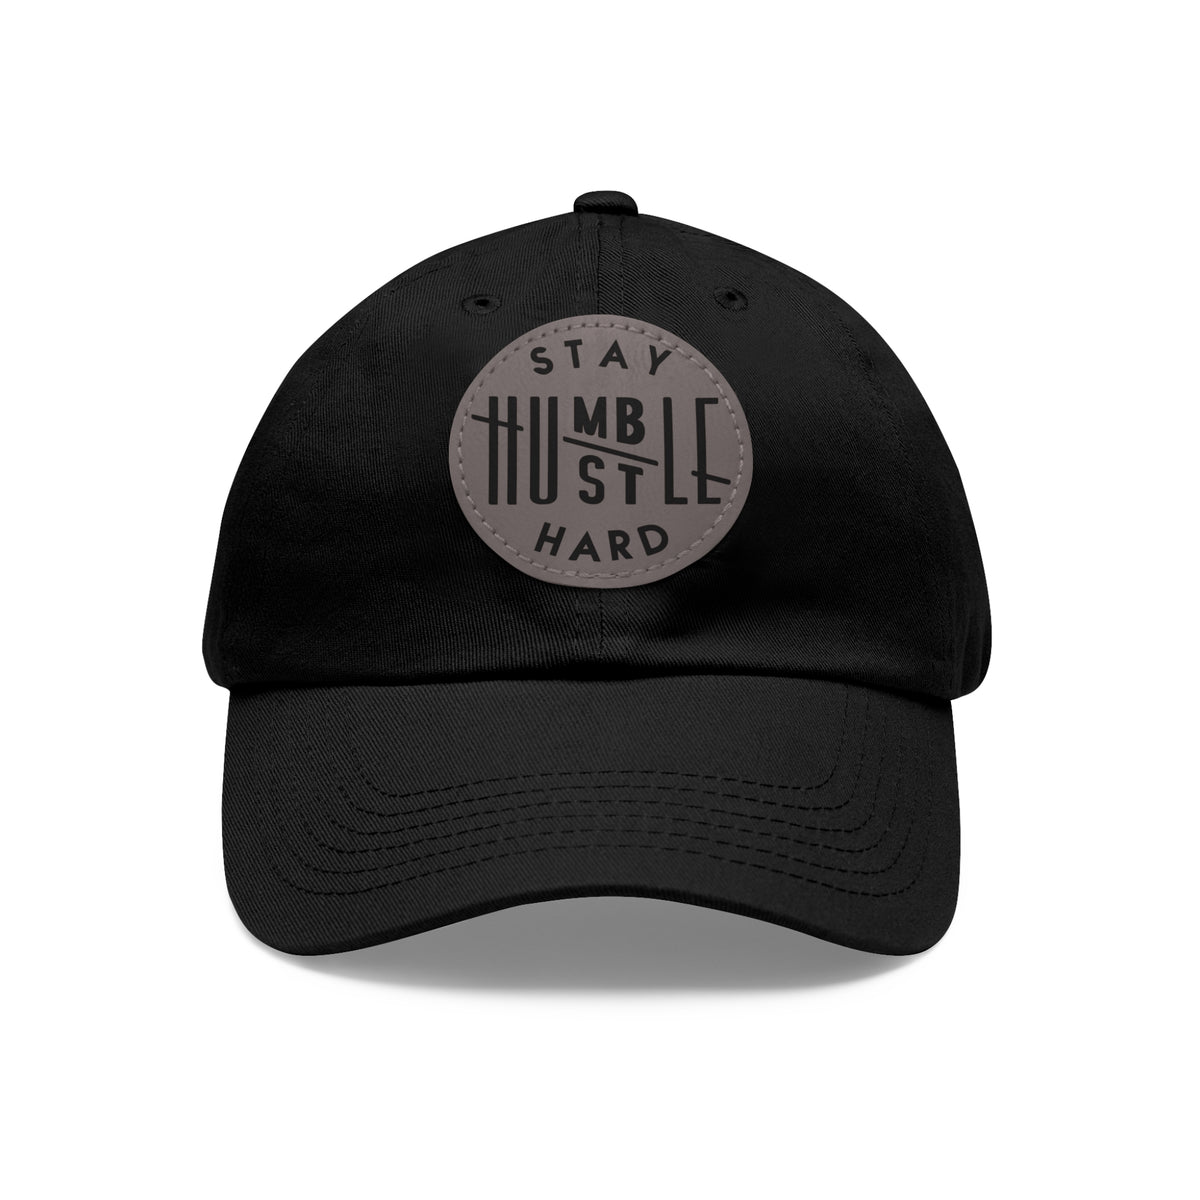 Stay Humble Hustle Hard Hat with Leather Patch